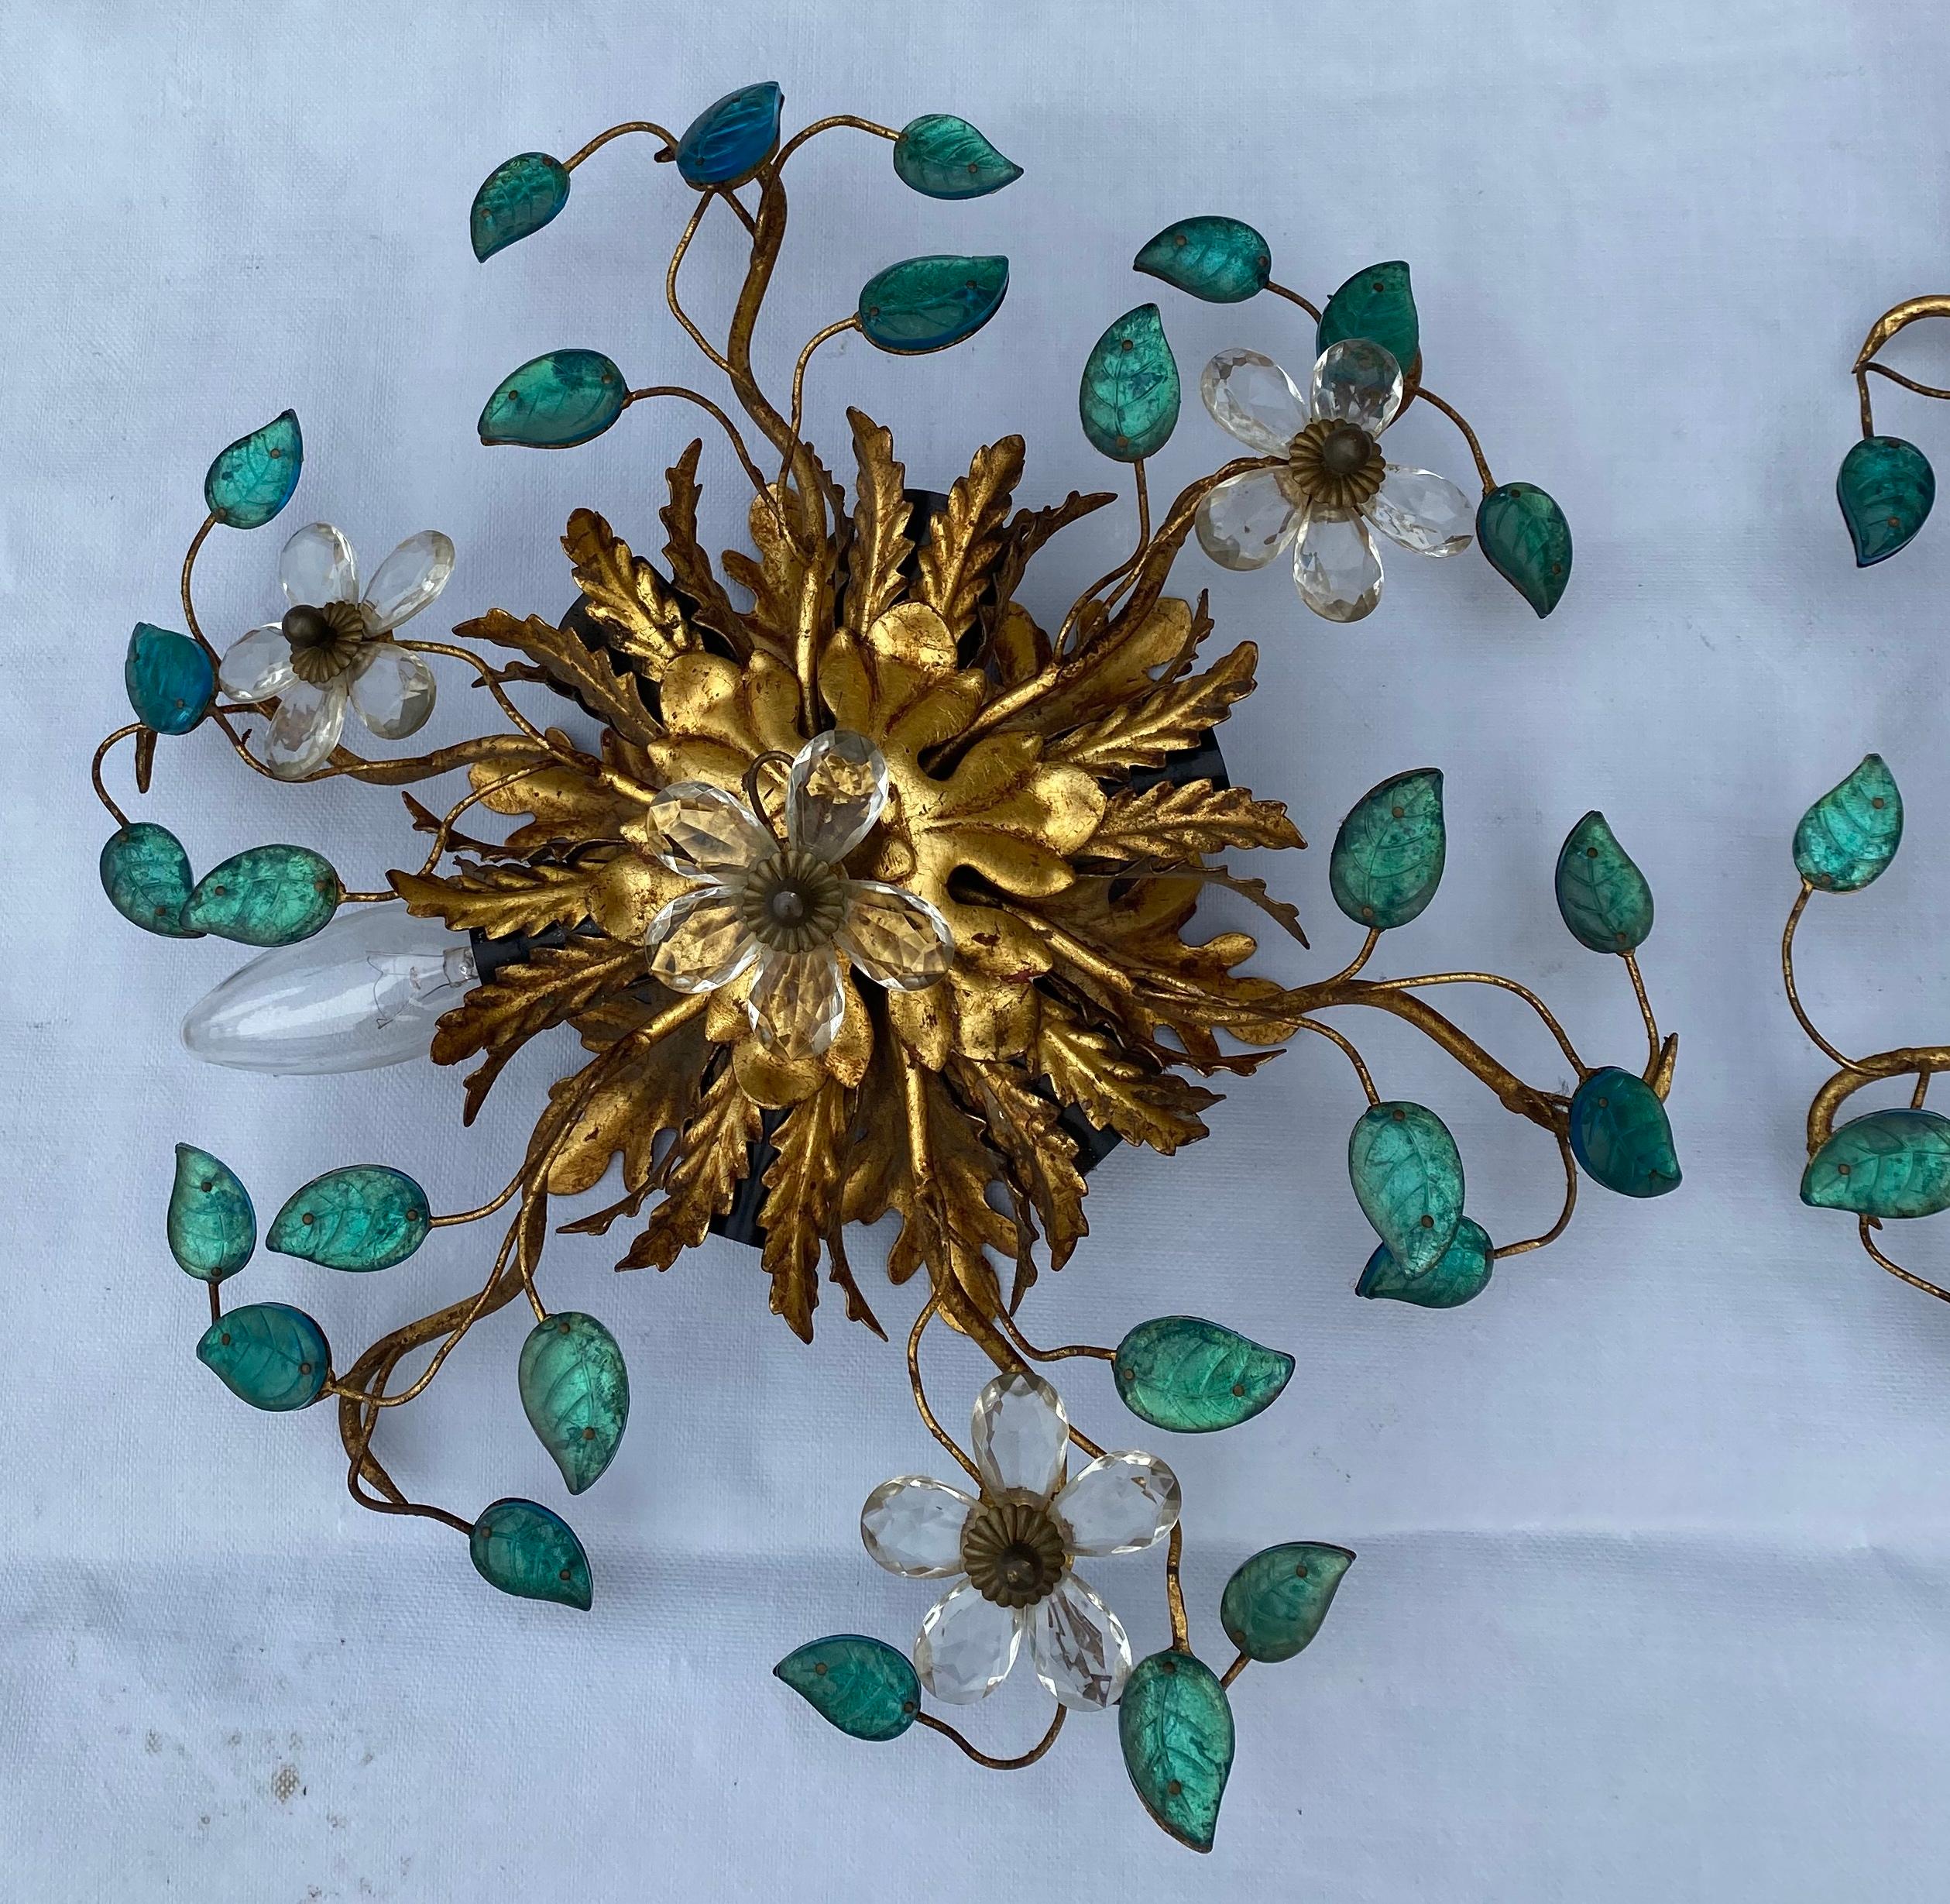 Pair Ceiling or wall lights in gilded metal, 6 bulbs. Adorned with blue-green colored leaves and glass or crystal flowers
Good condition, Circa 1970

Measures: Height: 20cm
Diameter: 40cm